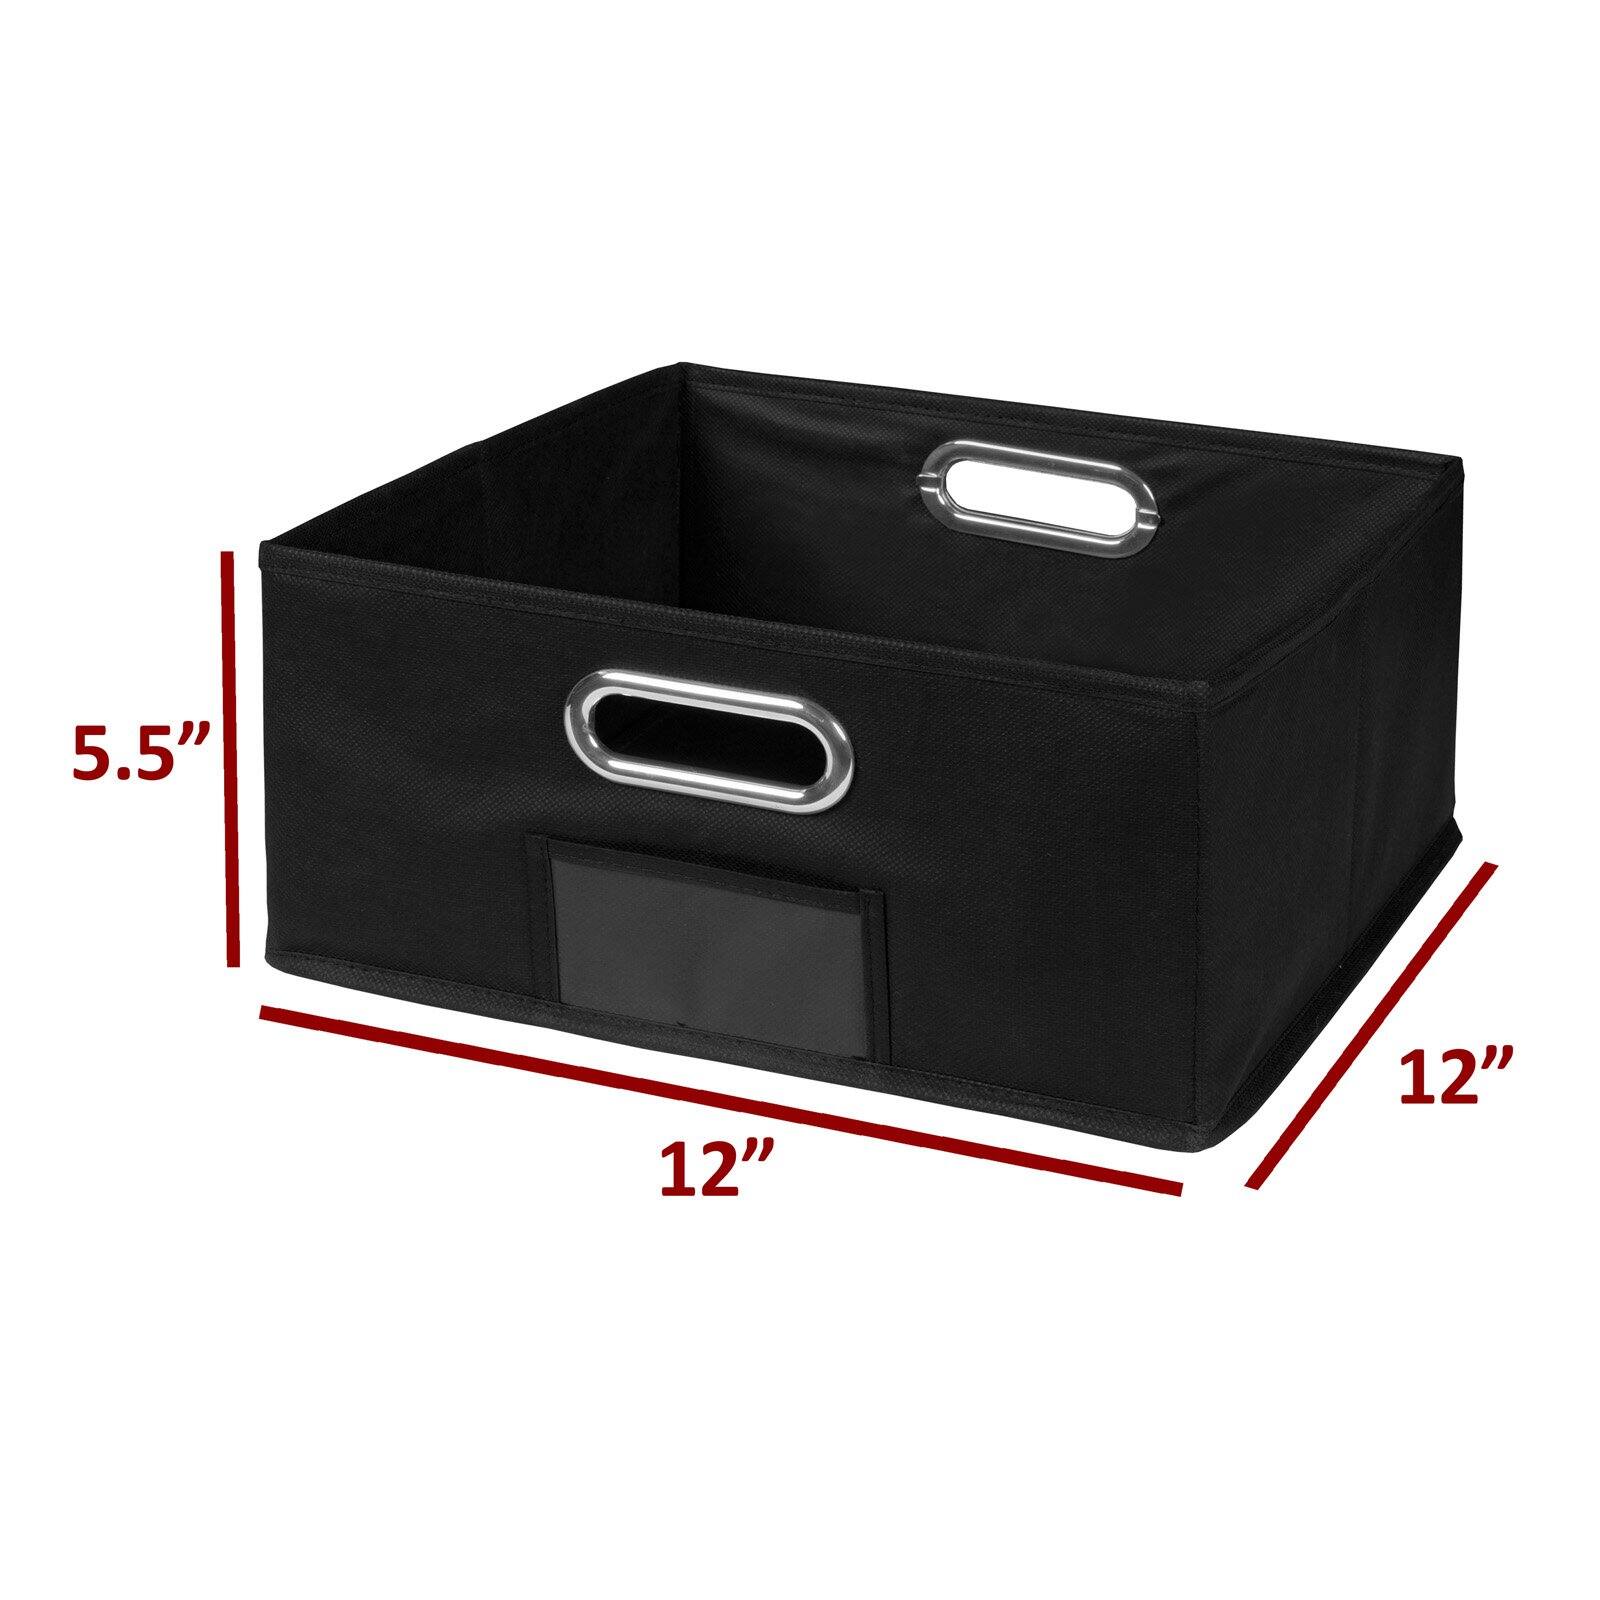 Niche Cubo Storage Set- 8 Full Cubes/4 Half Cubes with Foldable Storage Bins- Truffle/Pink - image 5 of 8